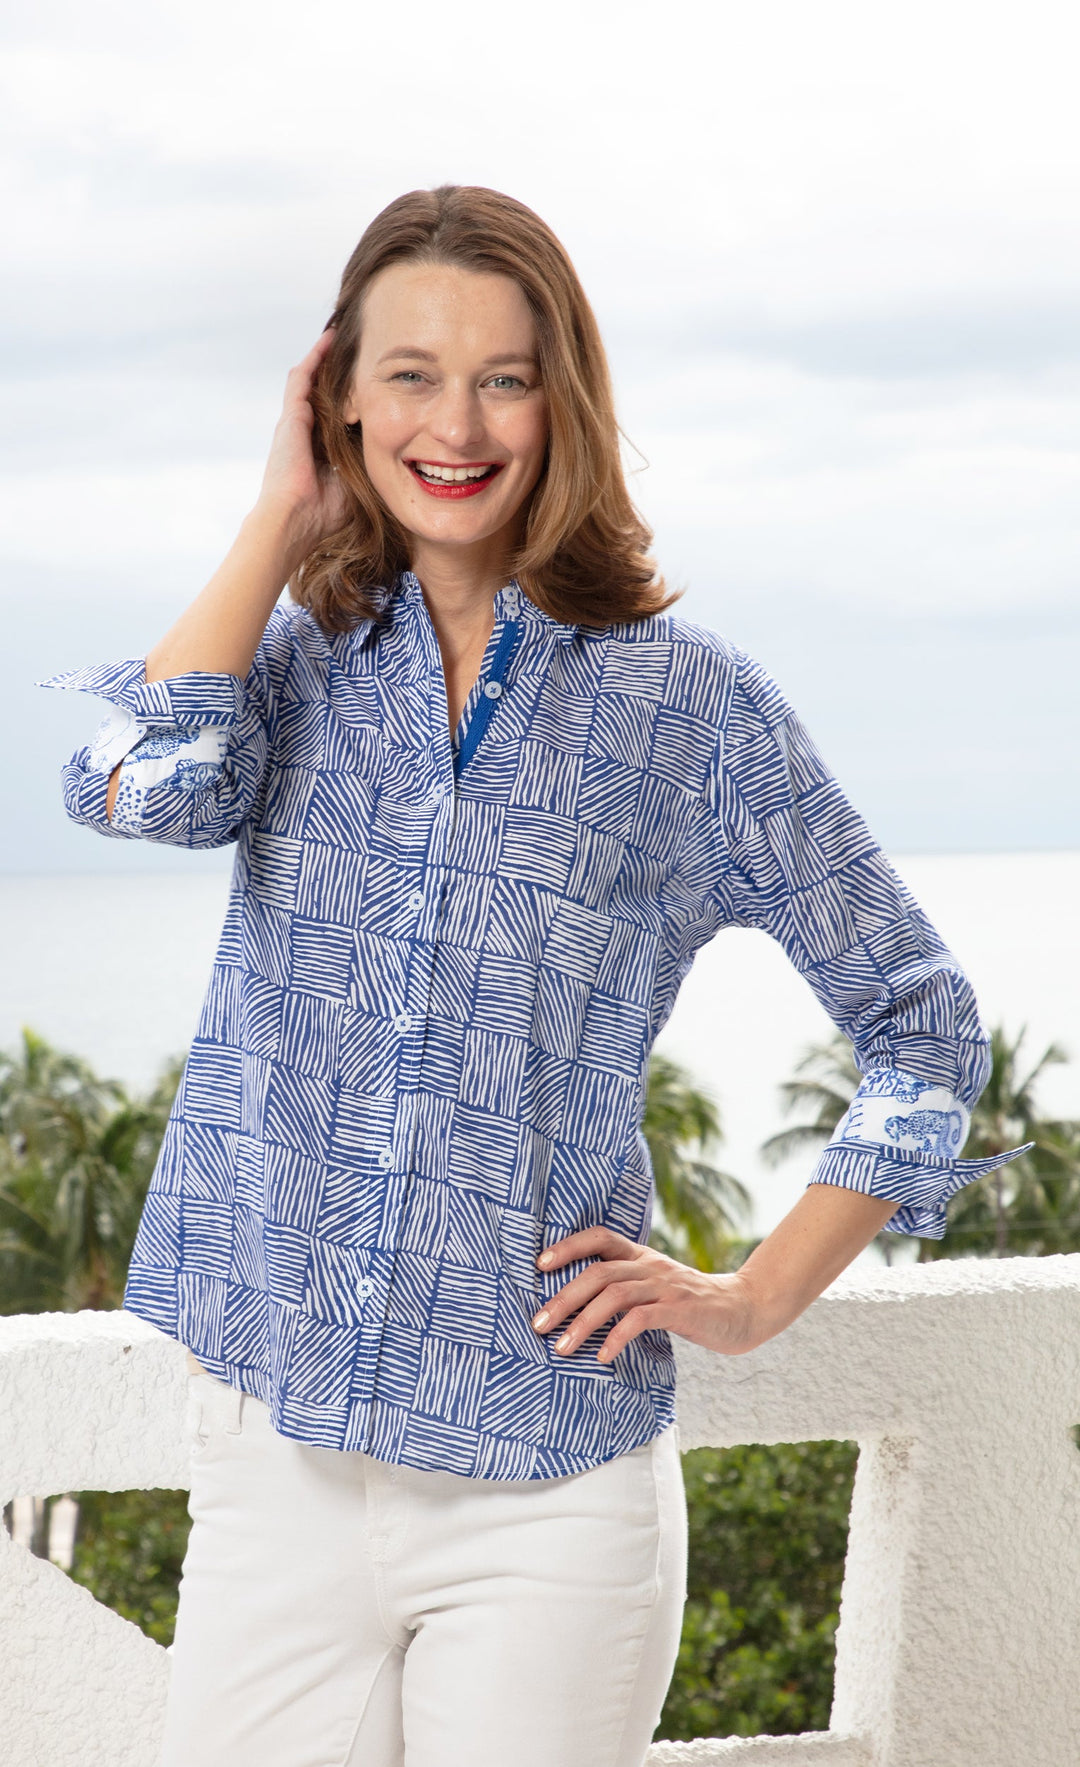 Dizzy-Lizzie Rome Shirt With 3/4 Sleeves - Navy White Criss Cross Boxes